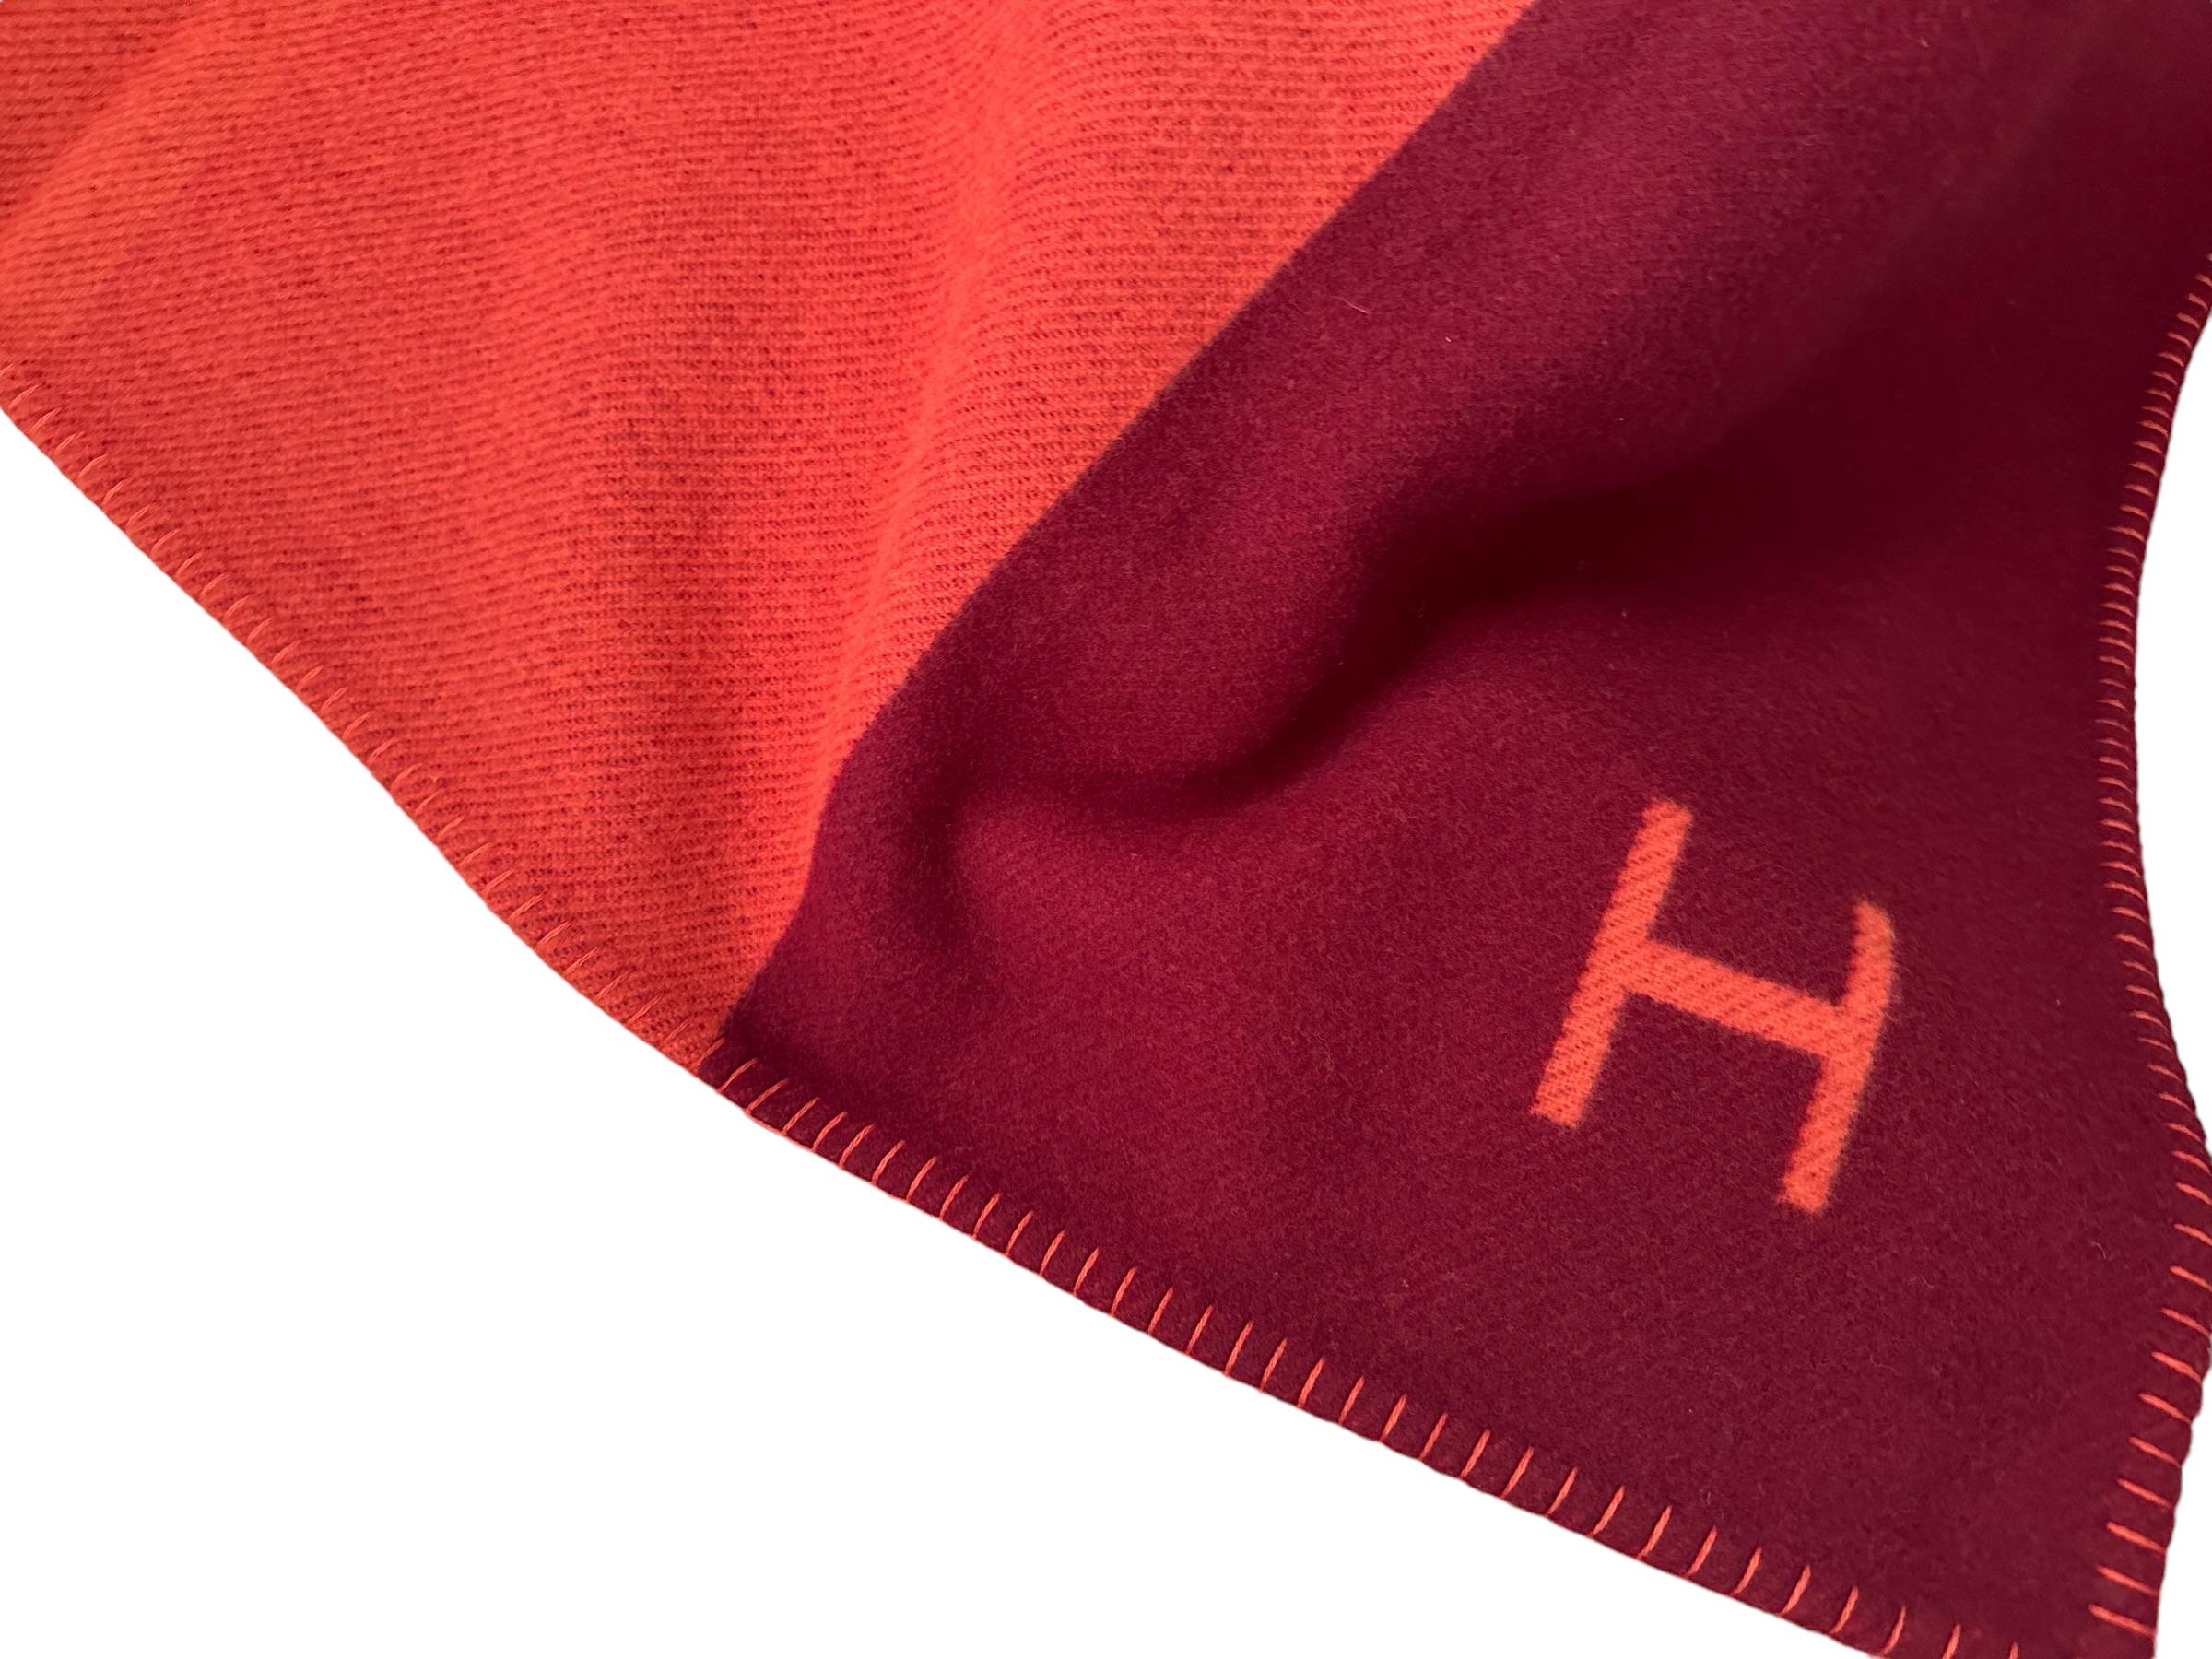 Hermes Blanket Throw
Rouge and Orange

Brand New
Make a statement in any room with this blanket 
Taken out for photos only
Hermes throw blanket (90% merino wool, 10% cashmere)
Approx Measures 53